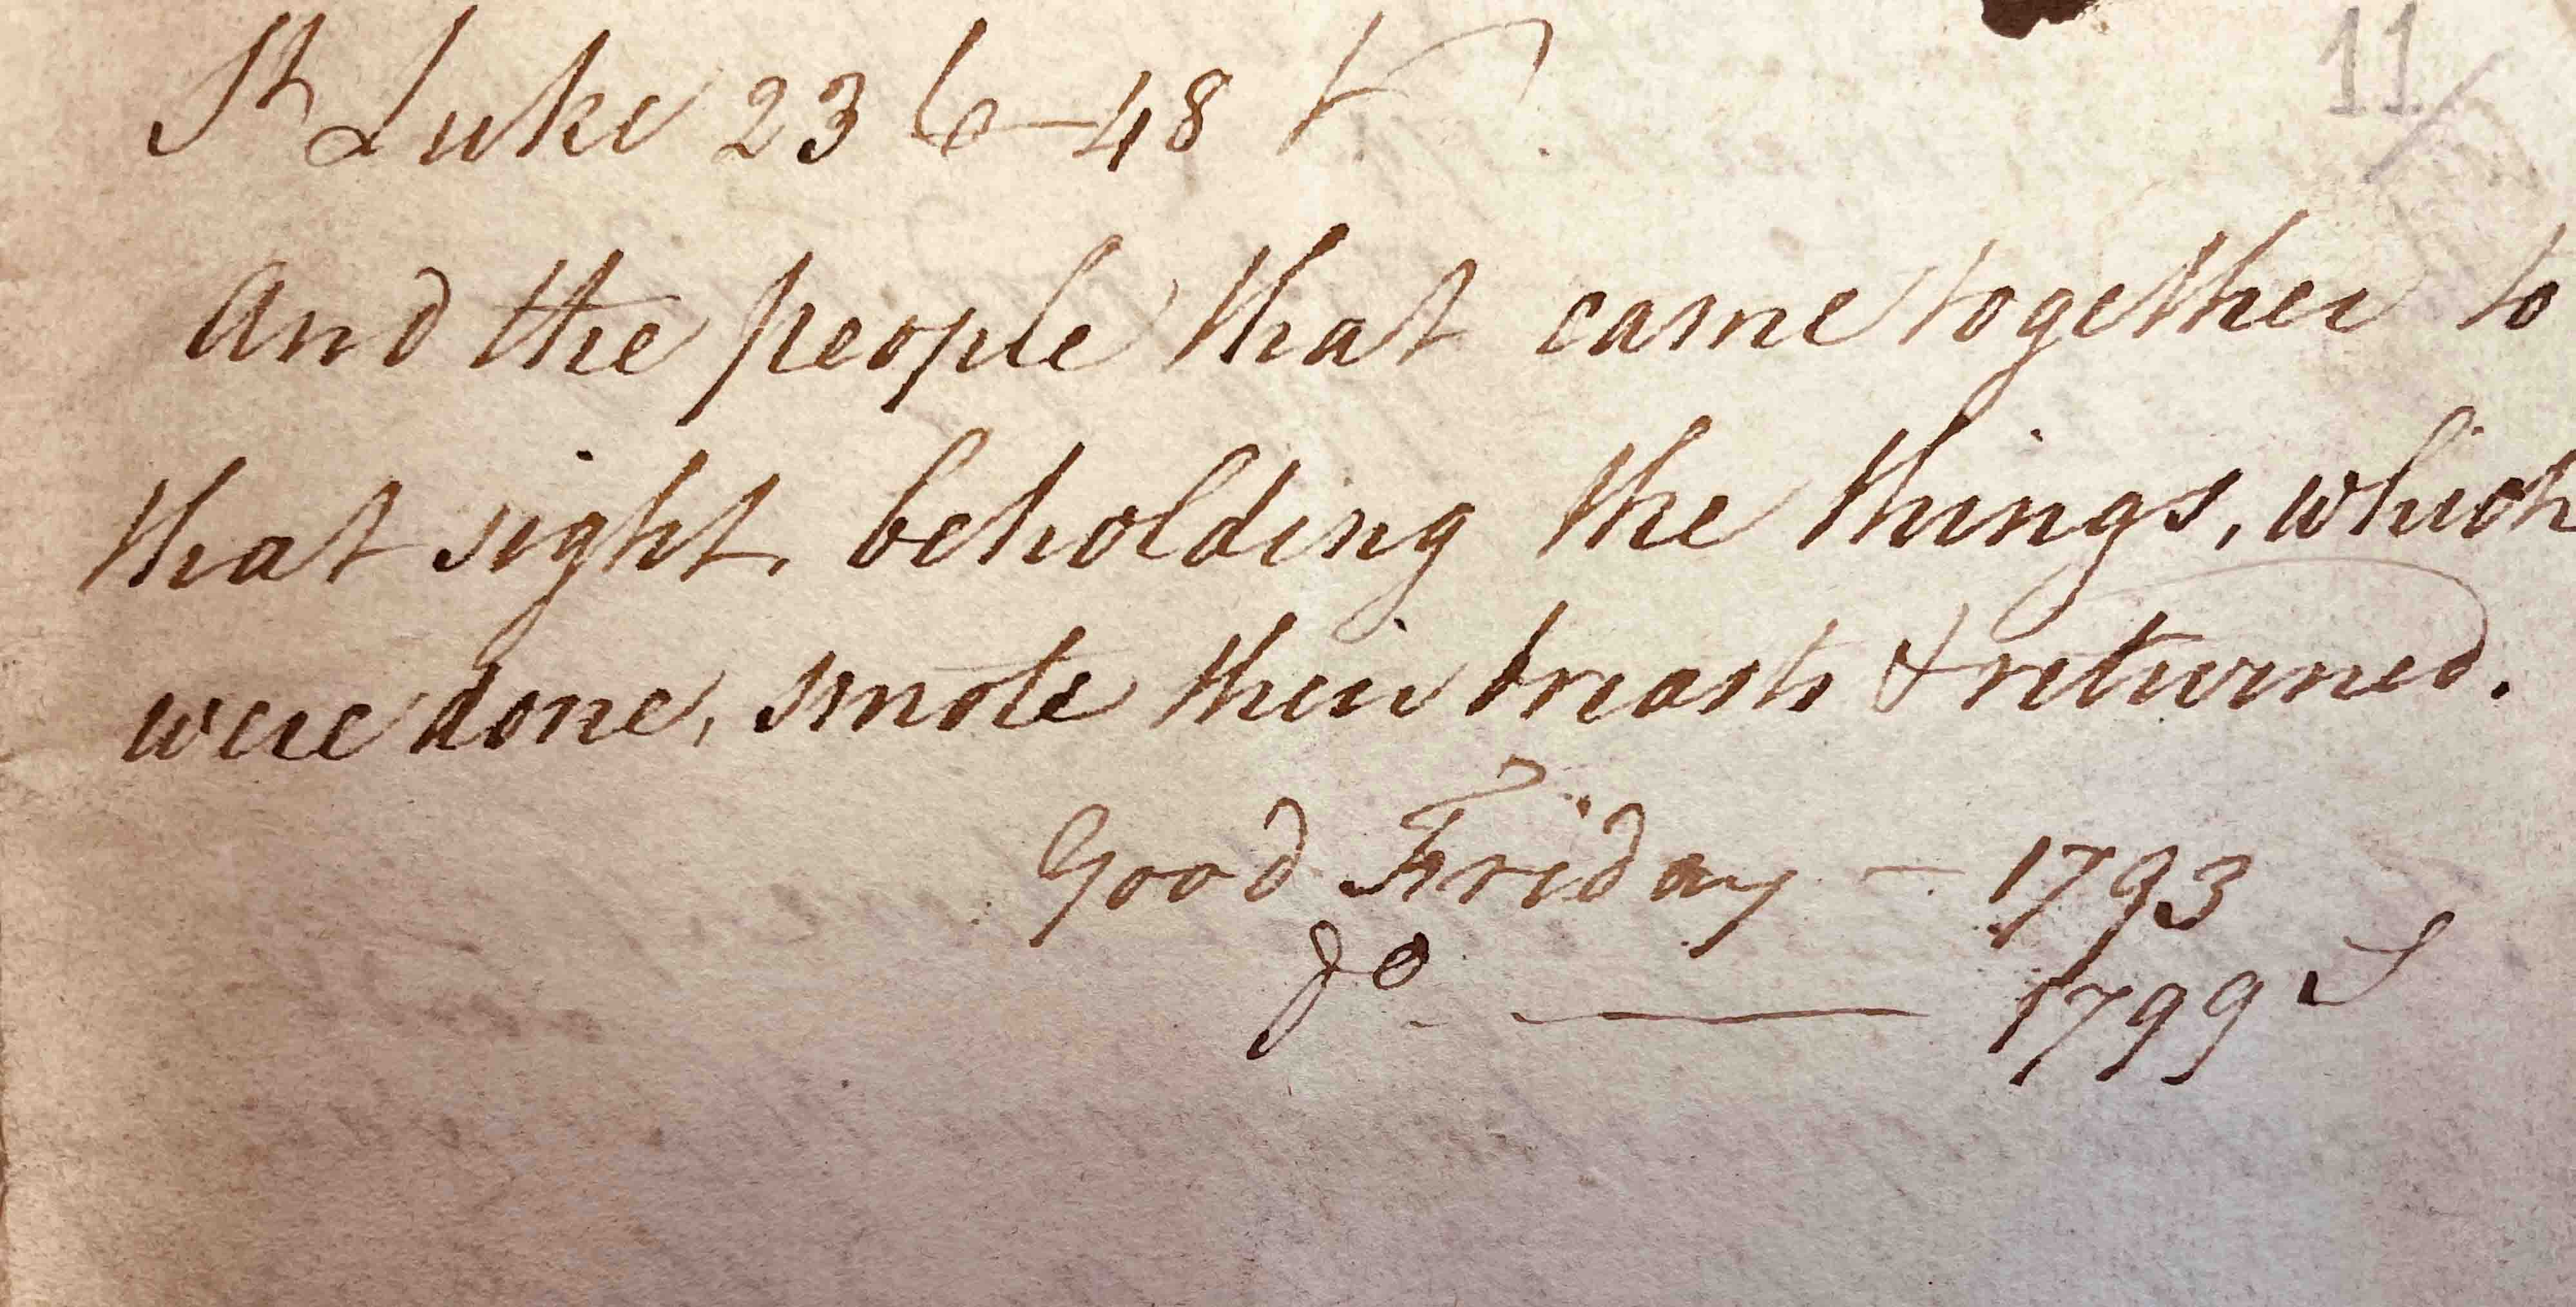 A typical sermon header inscribed by the Revd George Sealy, with the biblical context (Luke 23:6-23) and the title, with dates preached, in this instance Good Friday 1793, and 1799. RCB Library Ms 1132/11